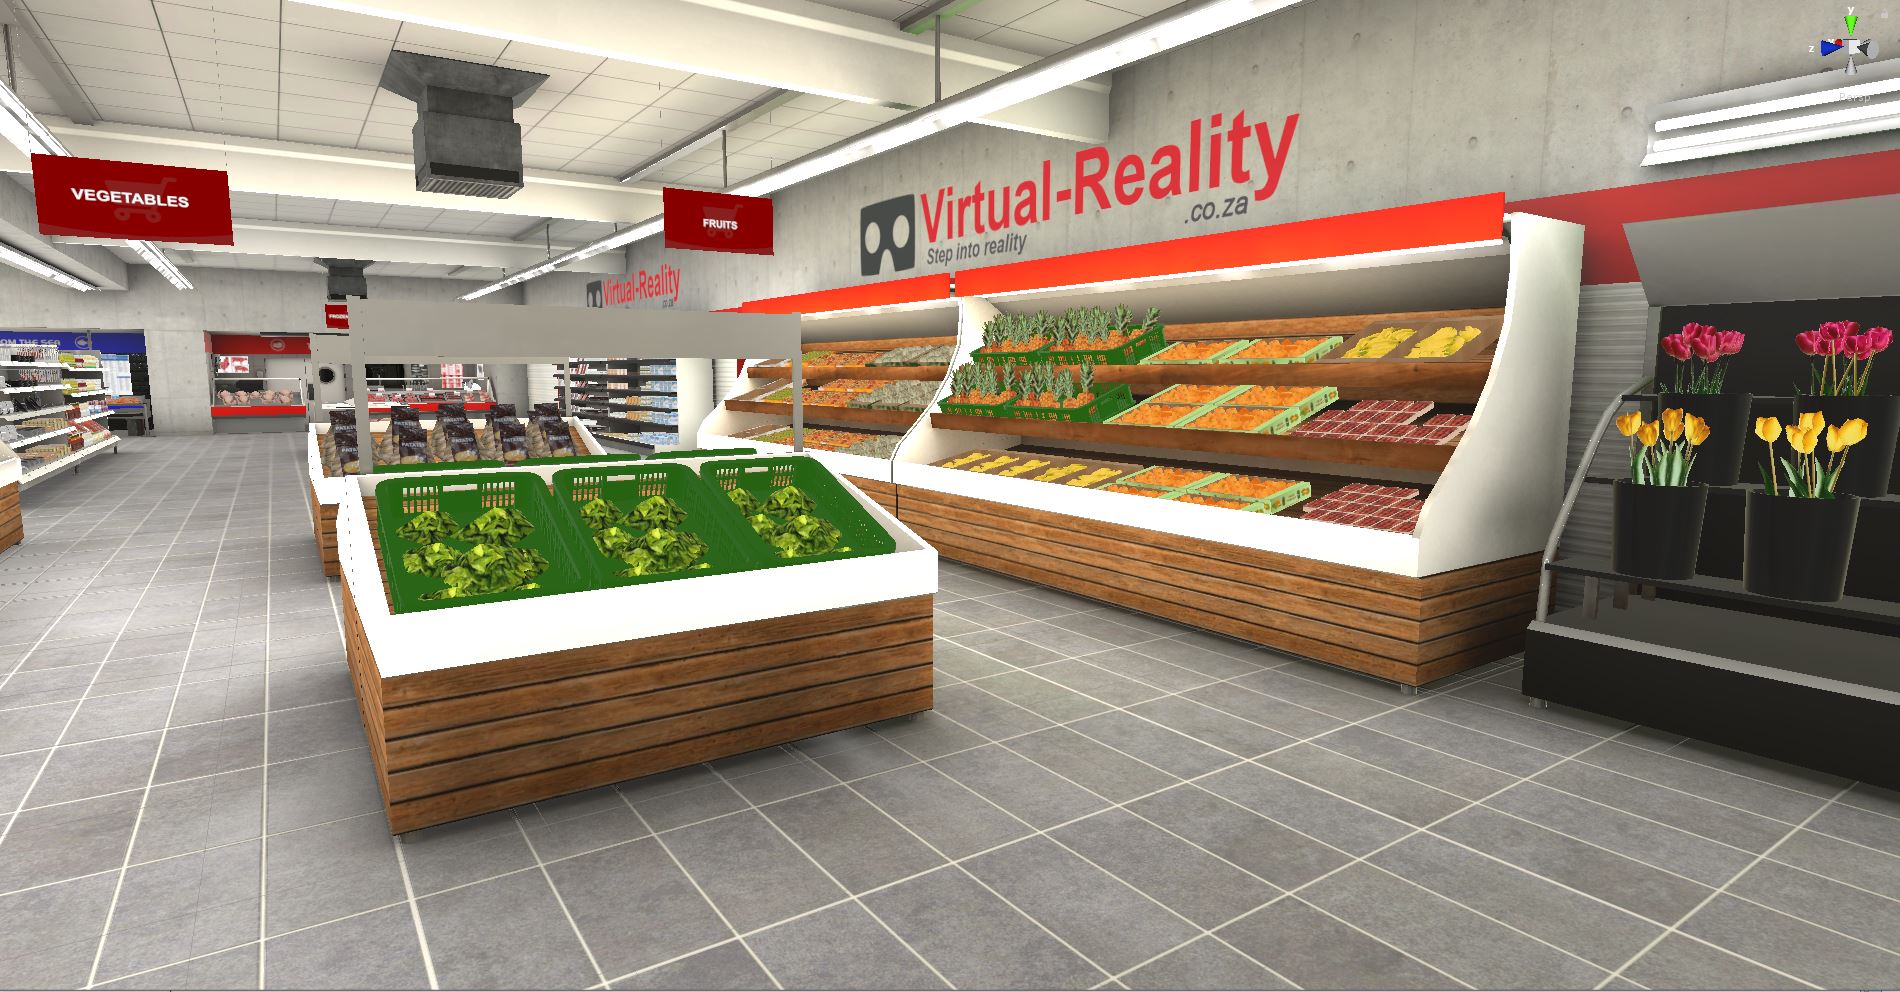 Virtual Reality shopping the future for retailers.